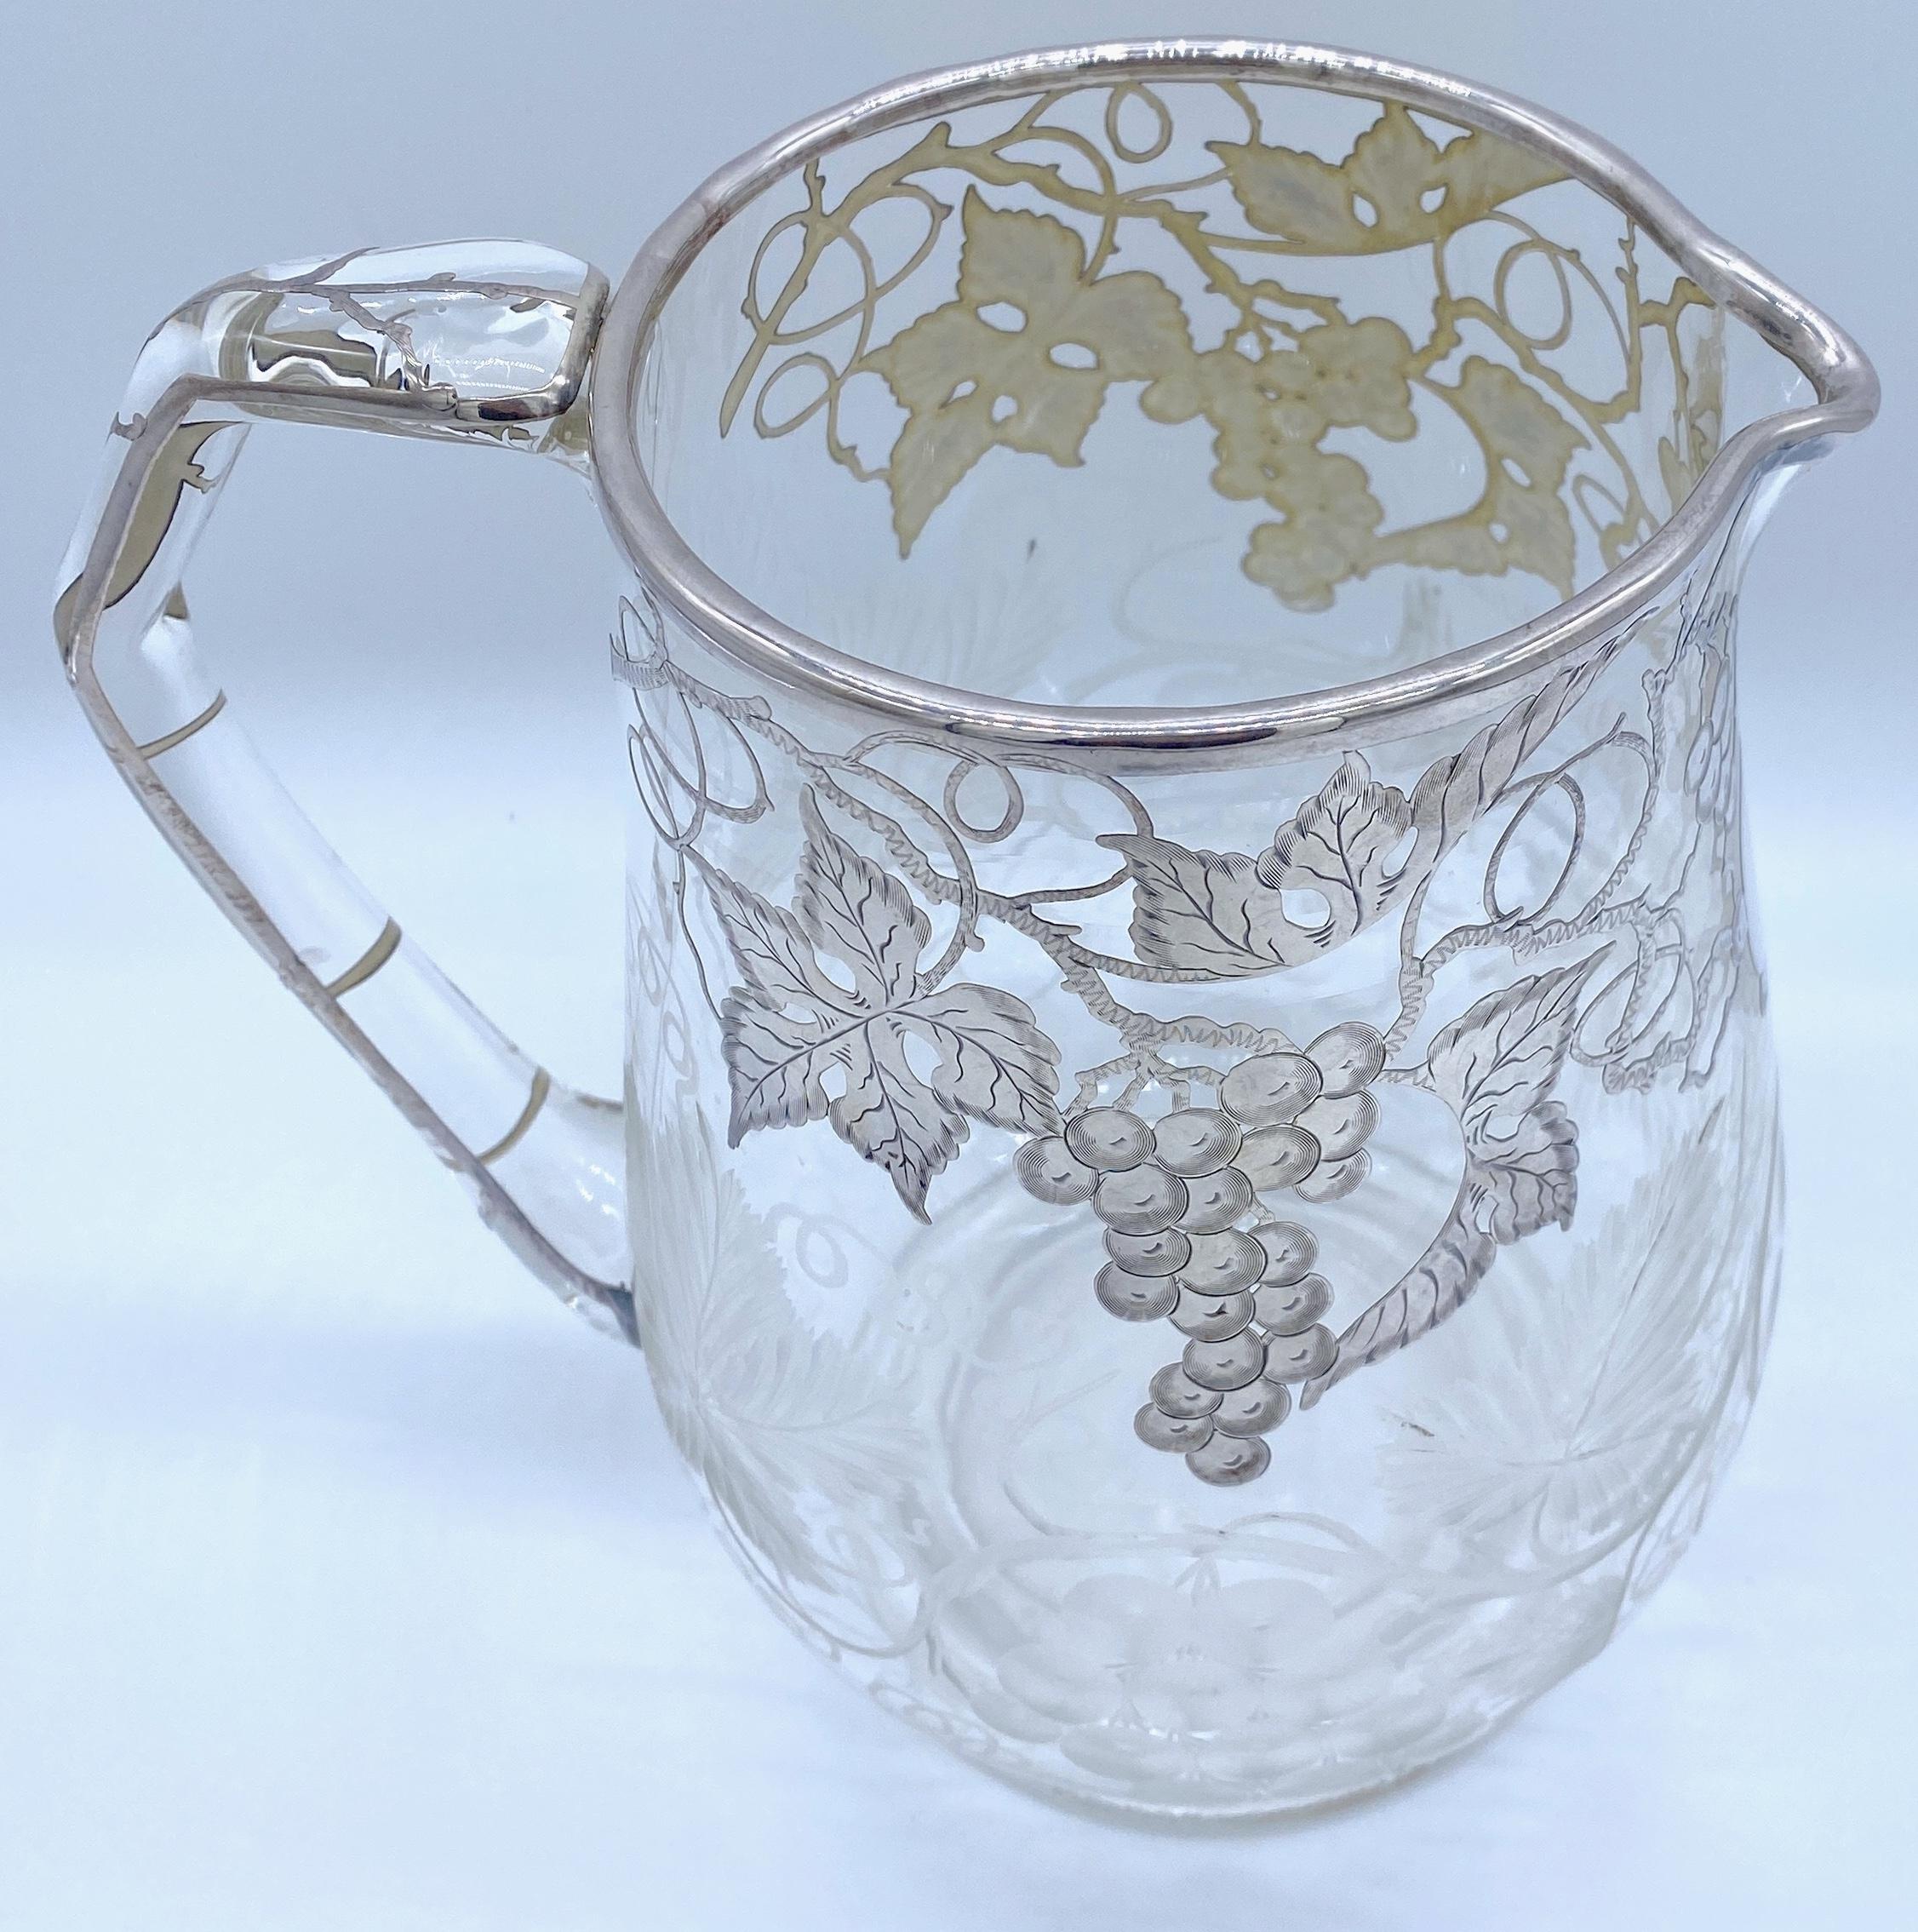 American Engraved Grape Motif & Silver overlay Crystal Pitcher, Possibly Hawkes
Unmarked, Circa 1900

Indulge in the timeless elegance of this American Engraved Grape Motif & Silver overlay Crystal Pitcher, pos attributed to Hawkes, dating back to